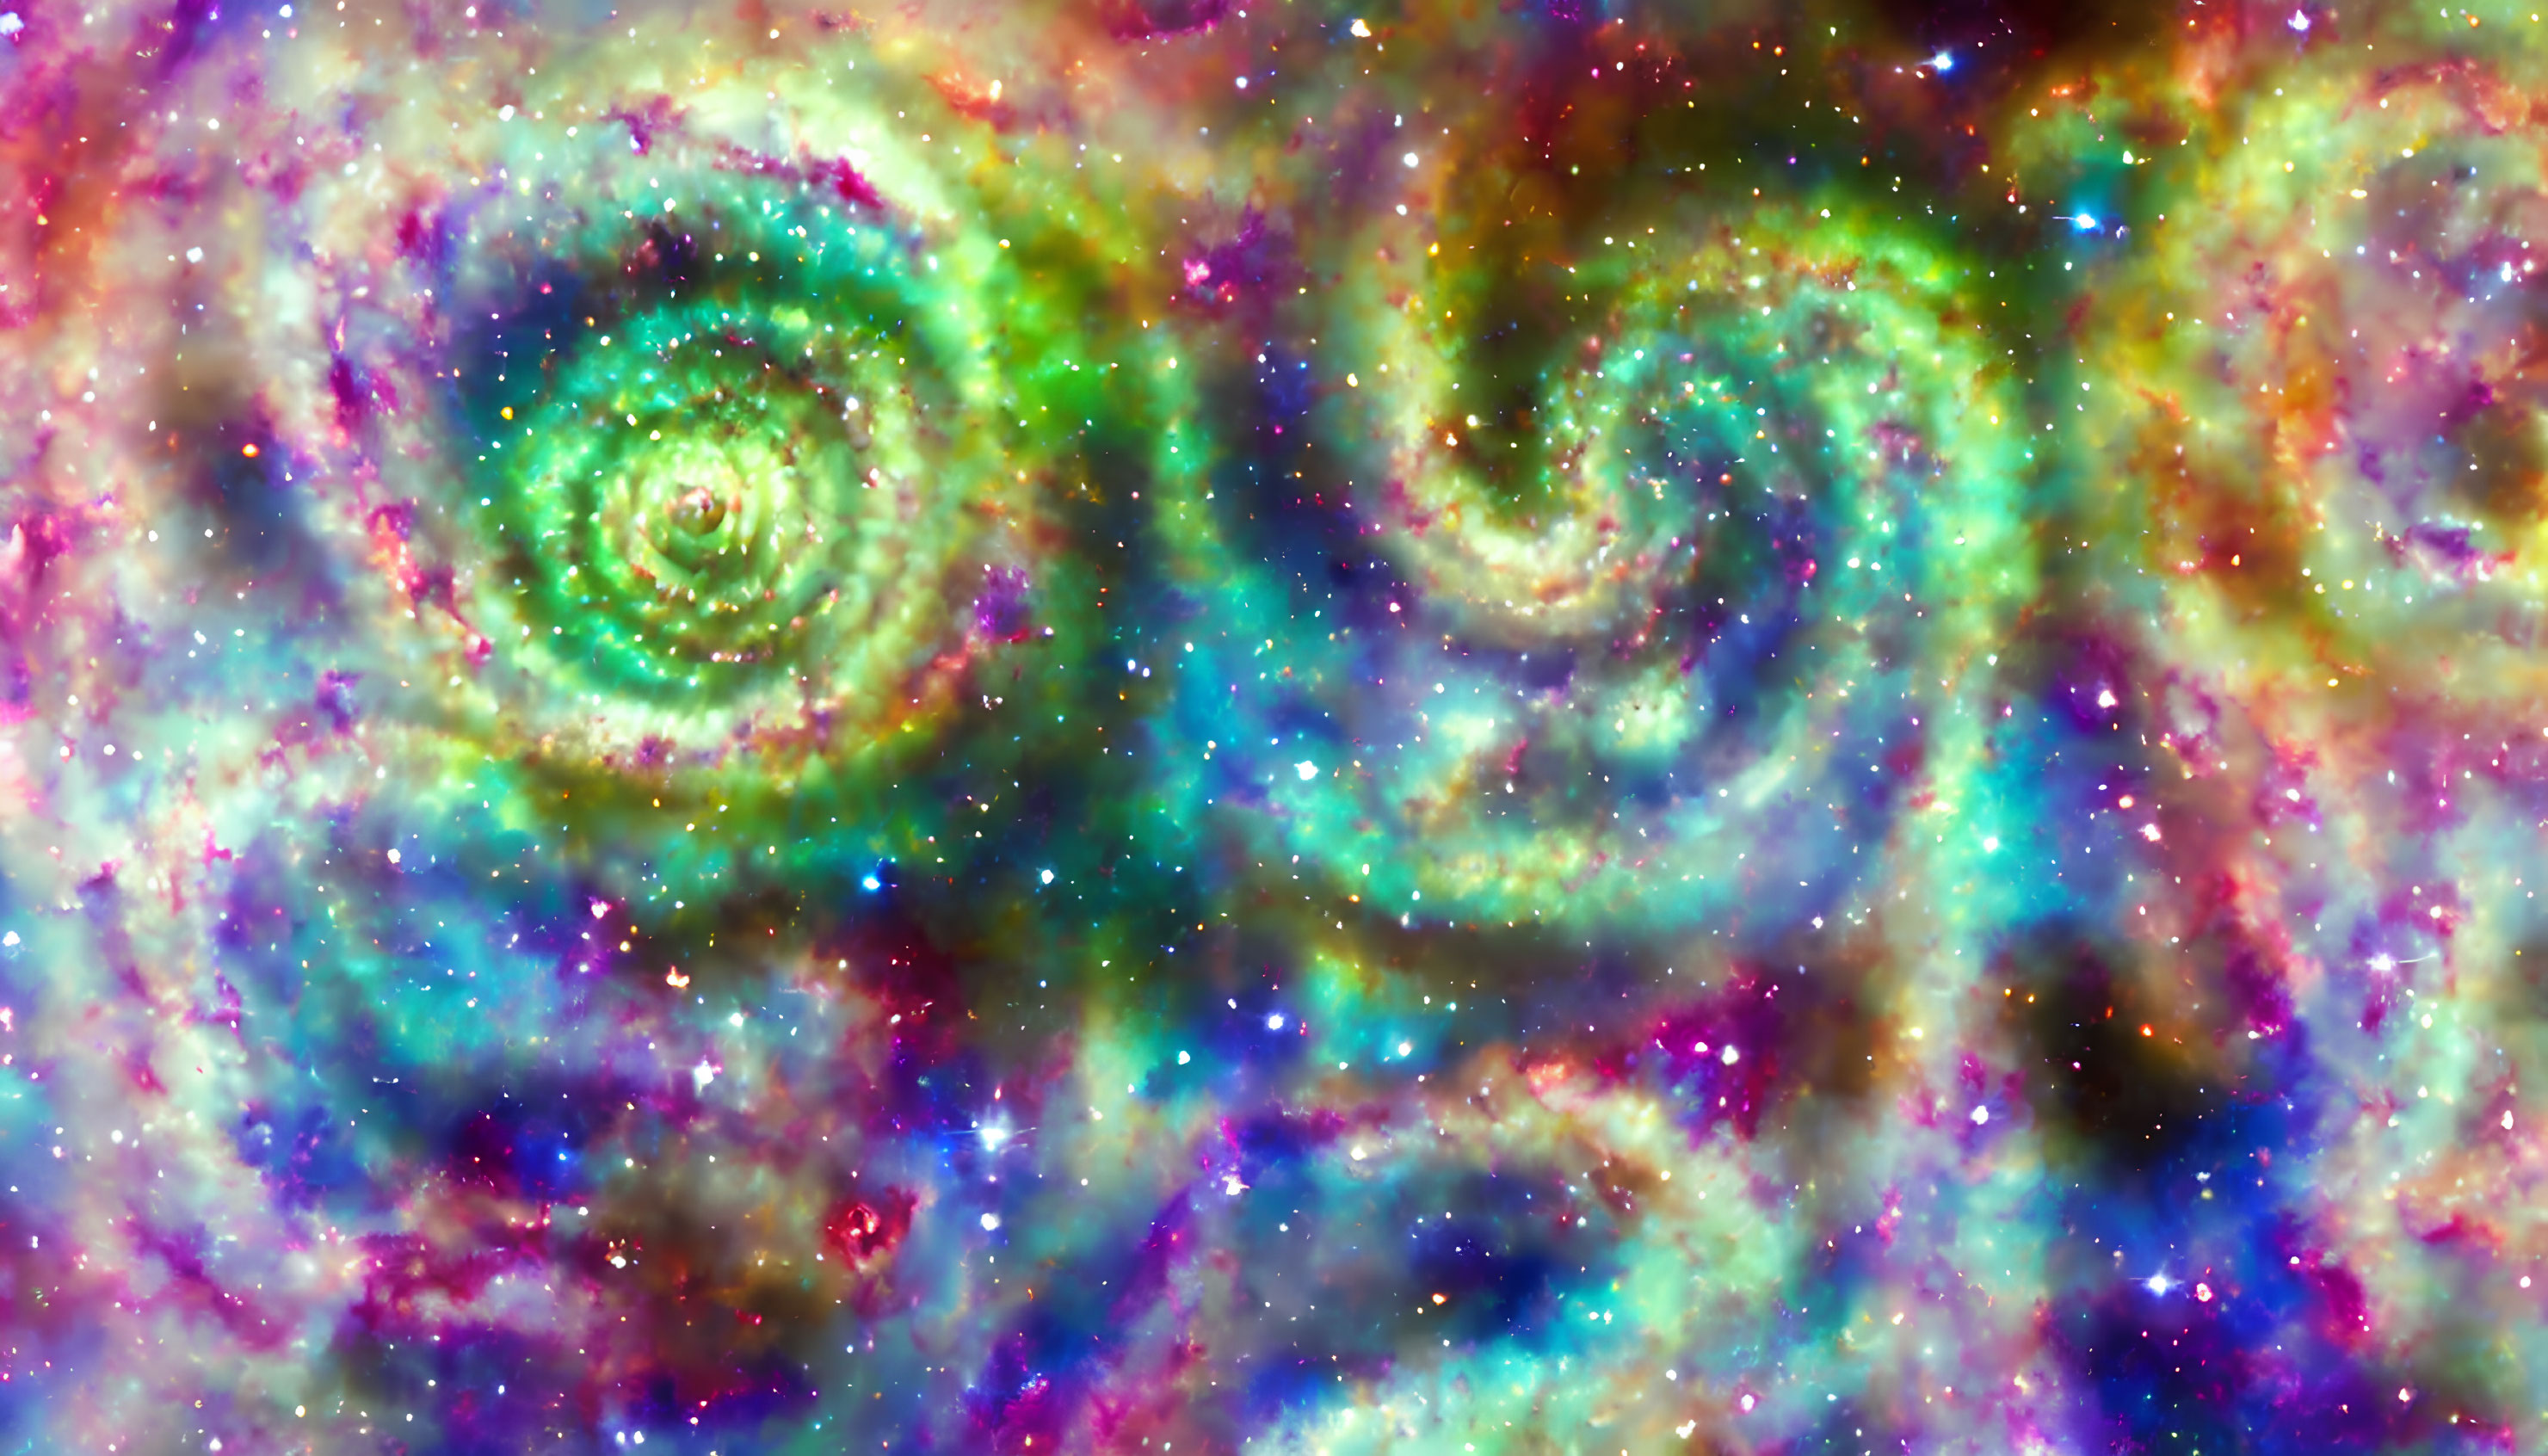 Colorful Swirling Galaxies Against Starry Backdrop